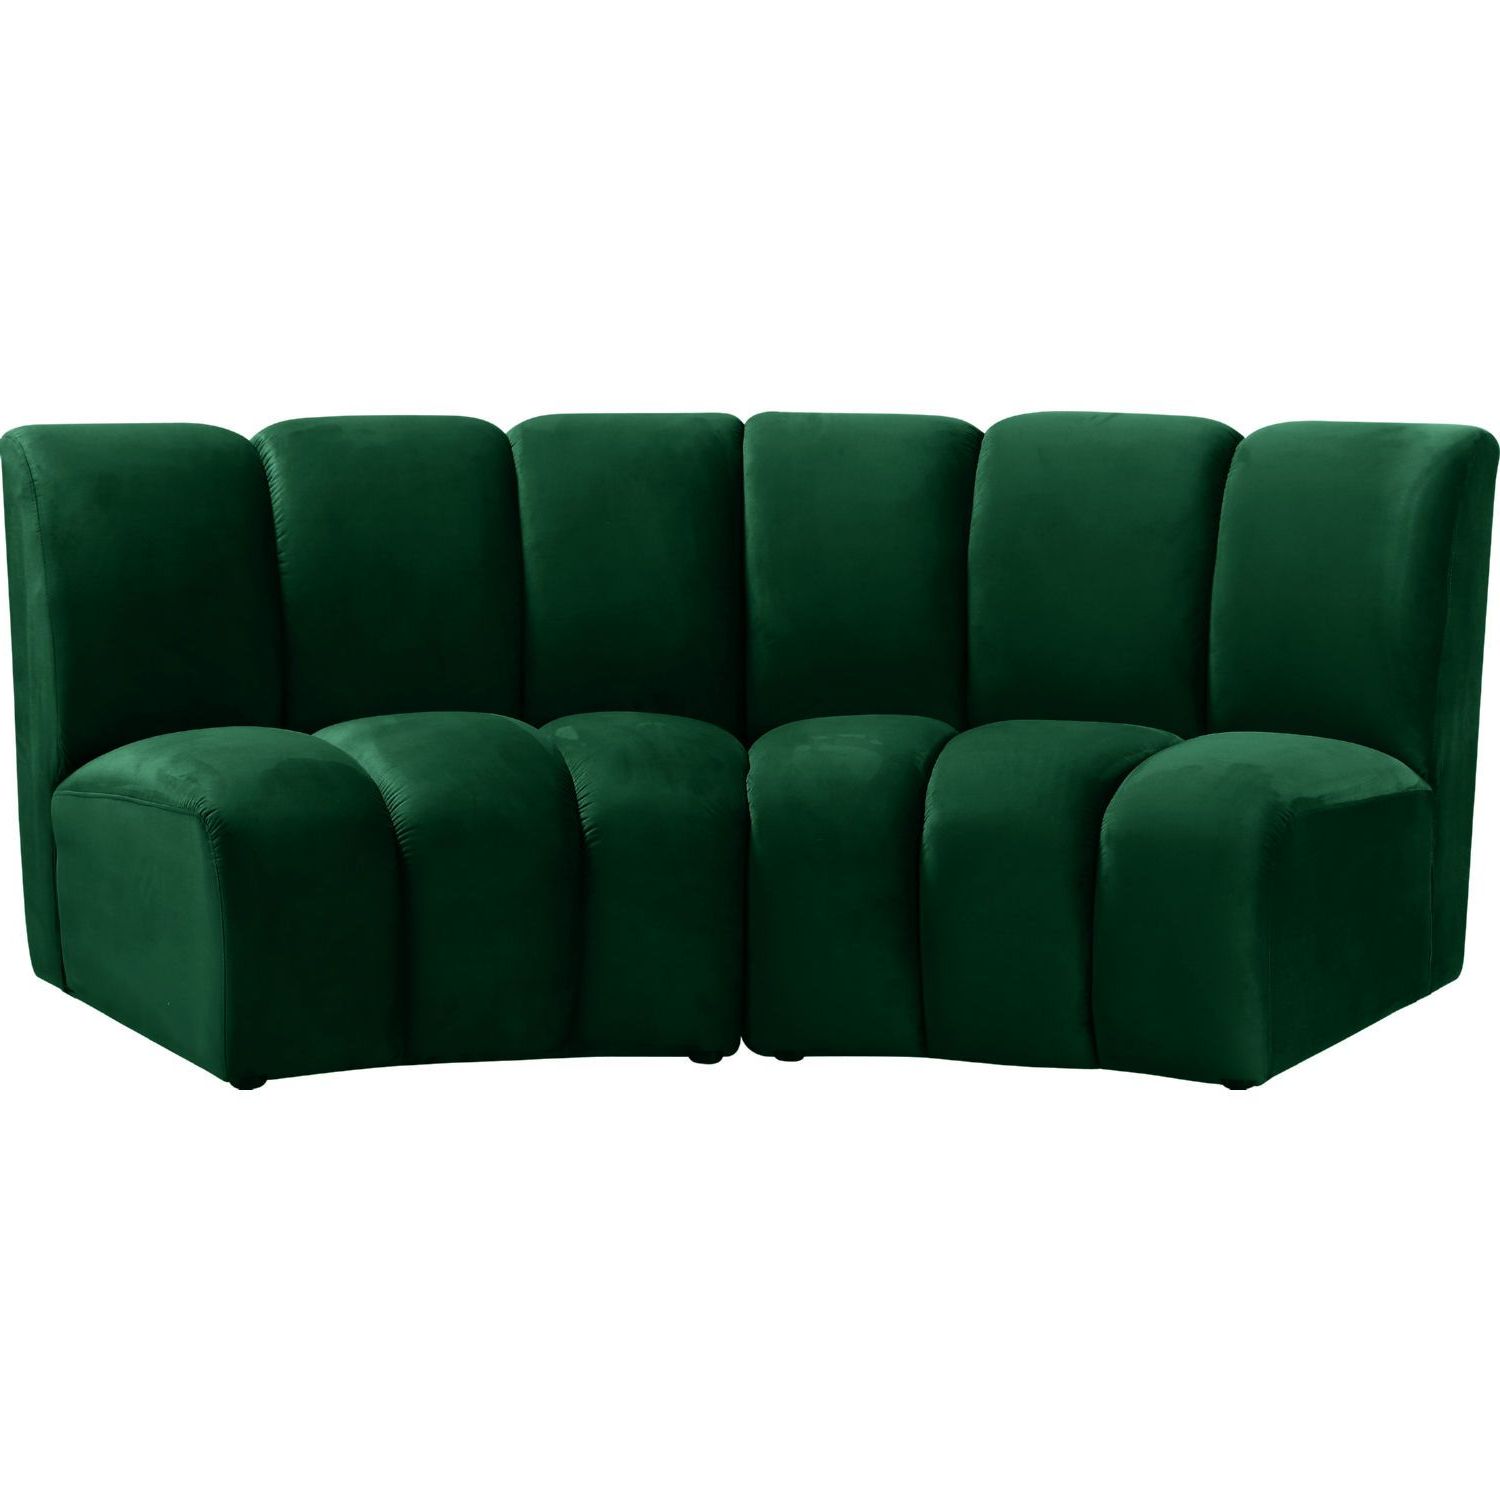 Most Popular Meridian Furniture 638green 5pc Infinity 5 Piece Modular Sectional Sofa In Green Velvet Modular Sectionals (View 2 of 15)